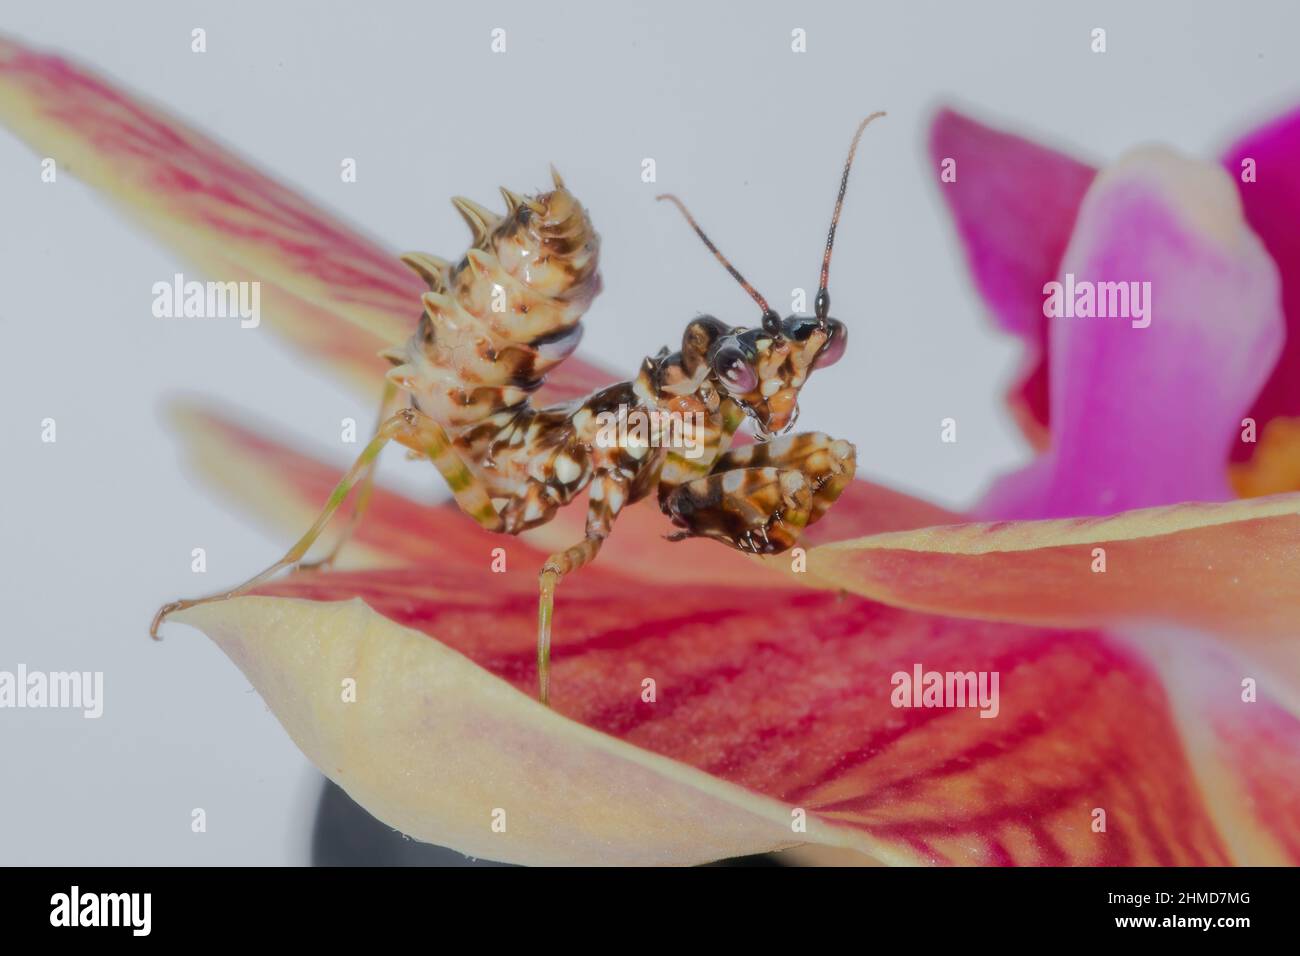 A close up of a Spiney Flower Praying Mantis nymph, on an orchid blossom. Stock Photo